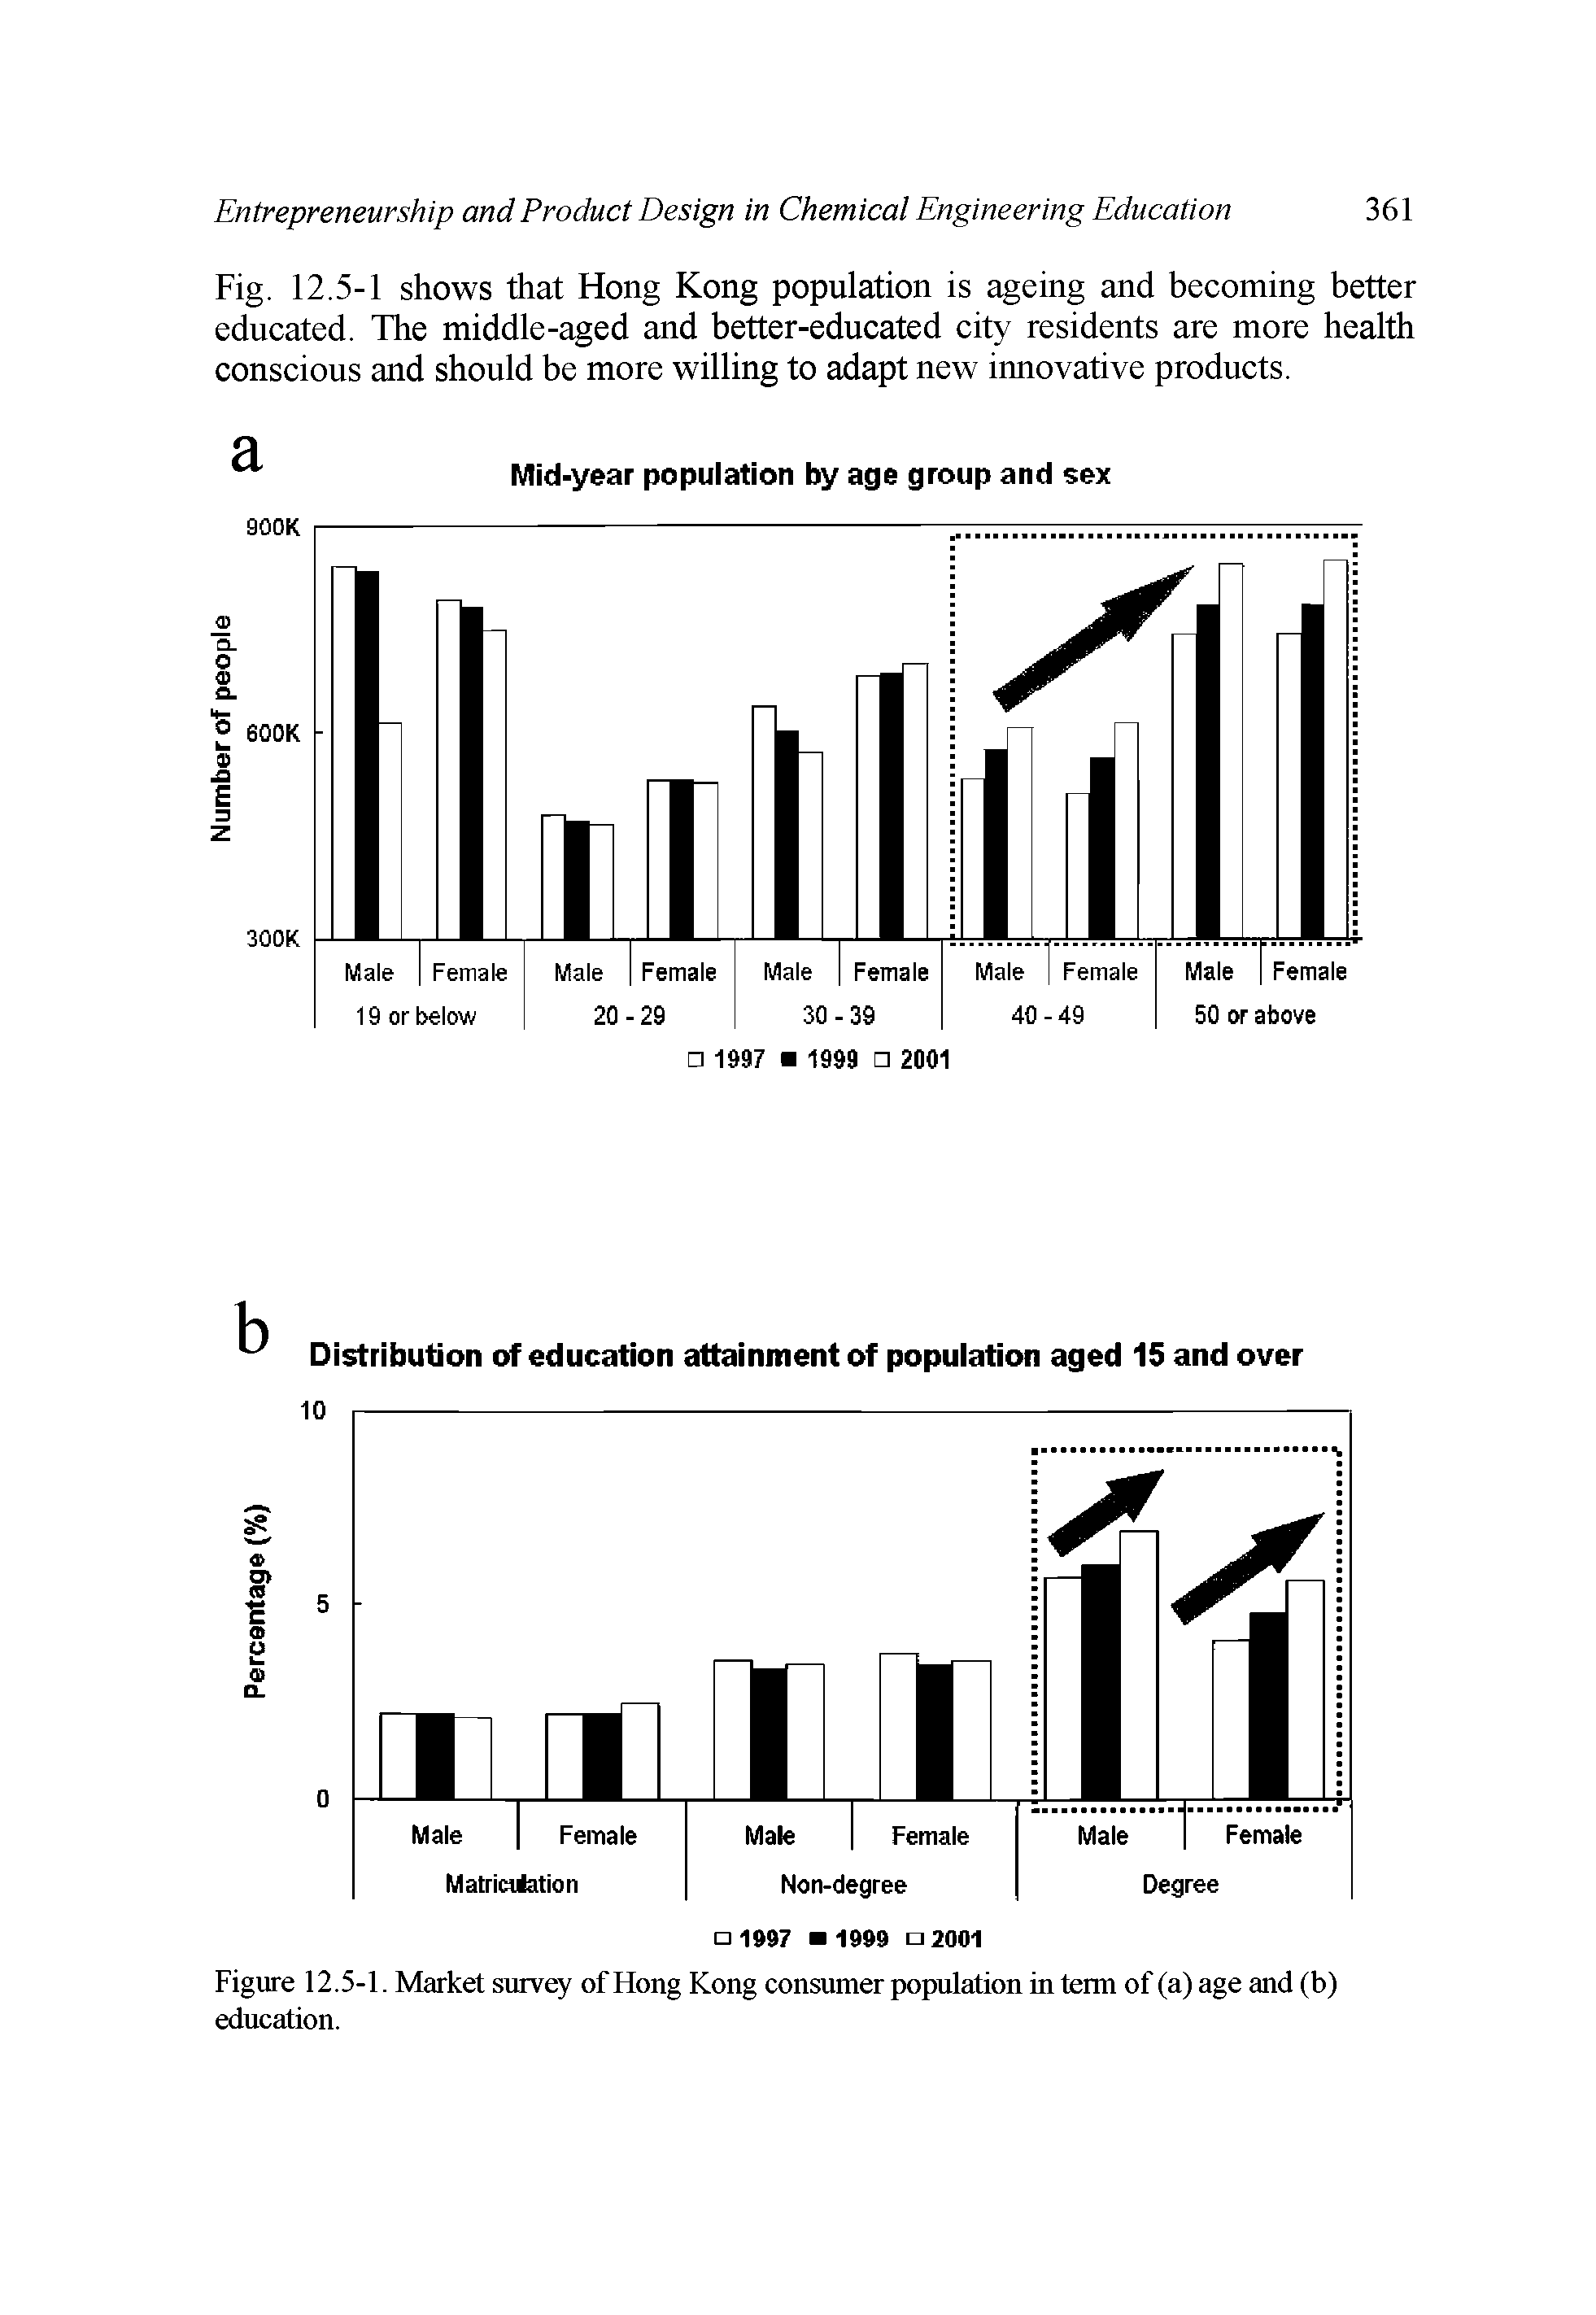 Figure 12.5-1. Market survey of Hong Kong consumer population in term of (a) age and (b) education.